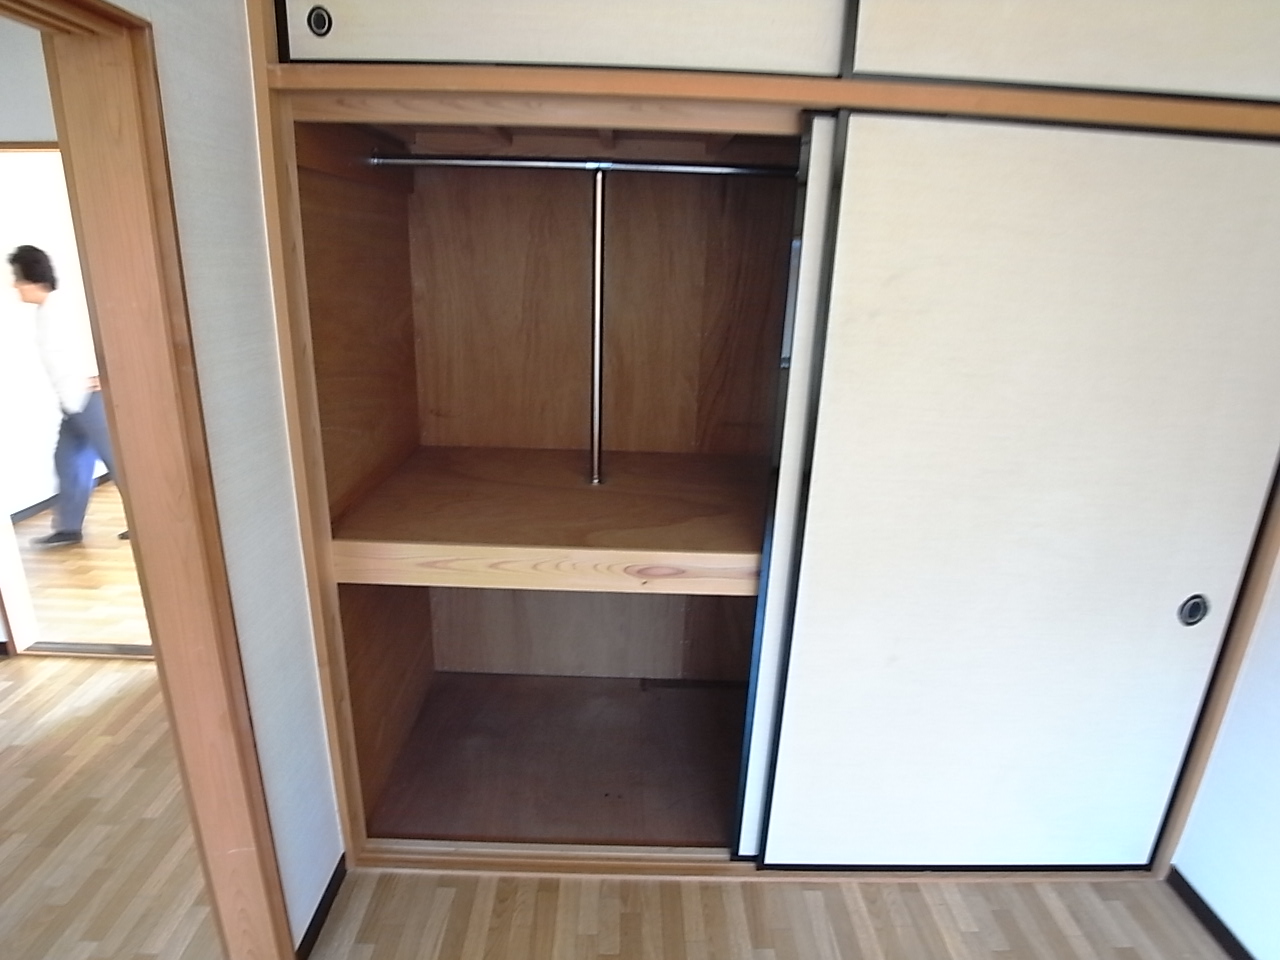 Receipt. It is a compartment of north Western-style. With upper closet. 